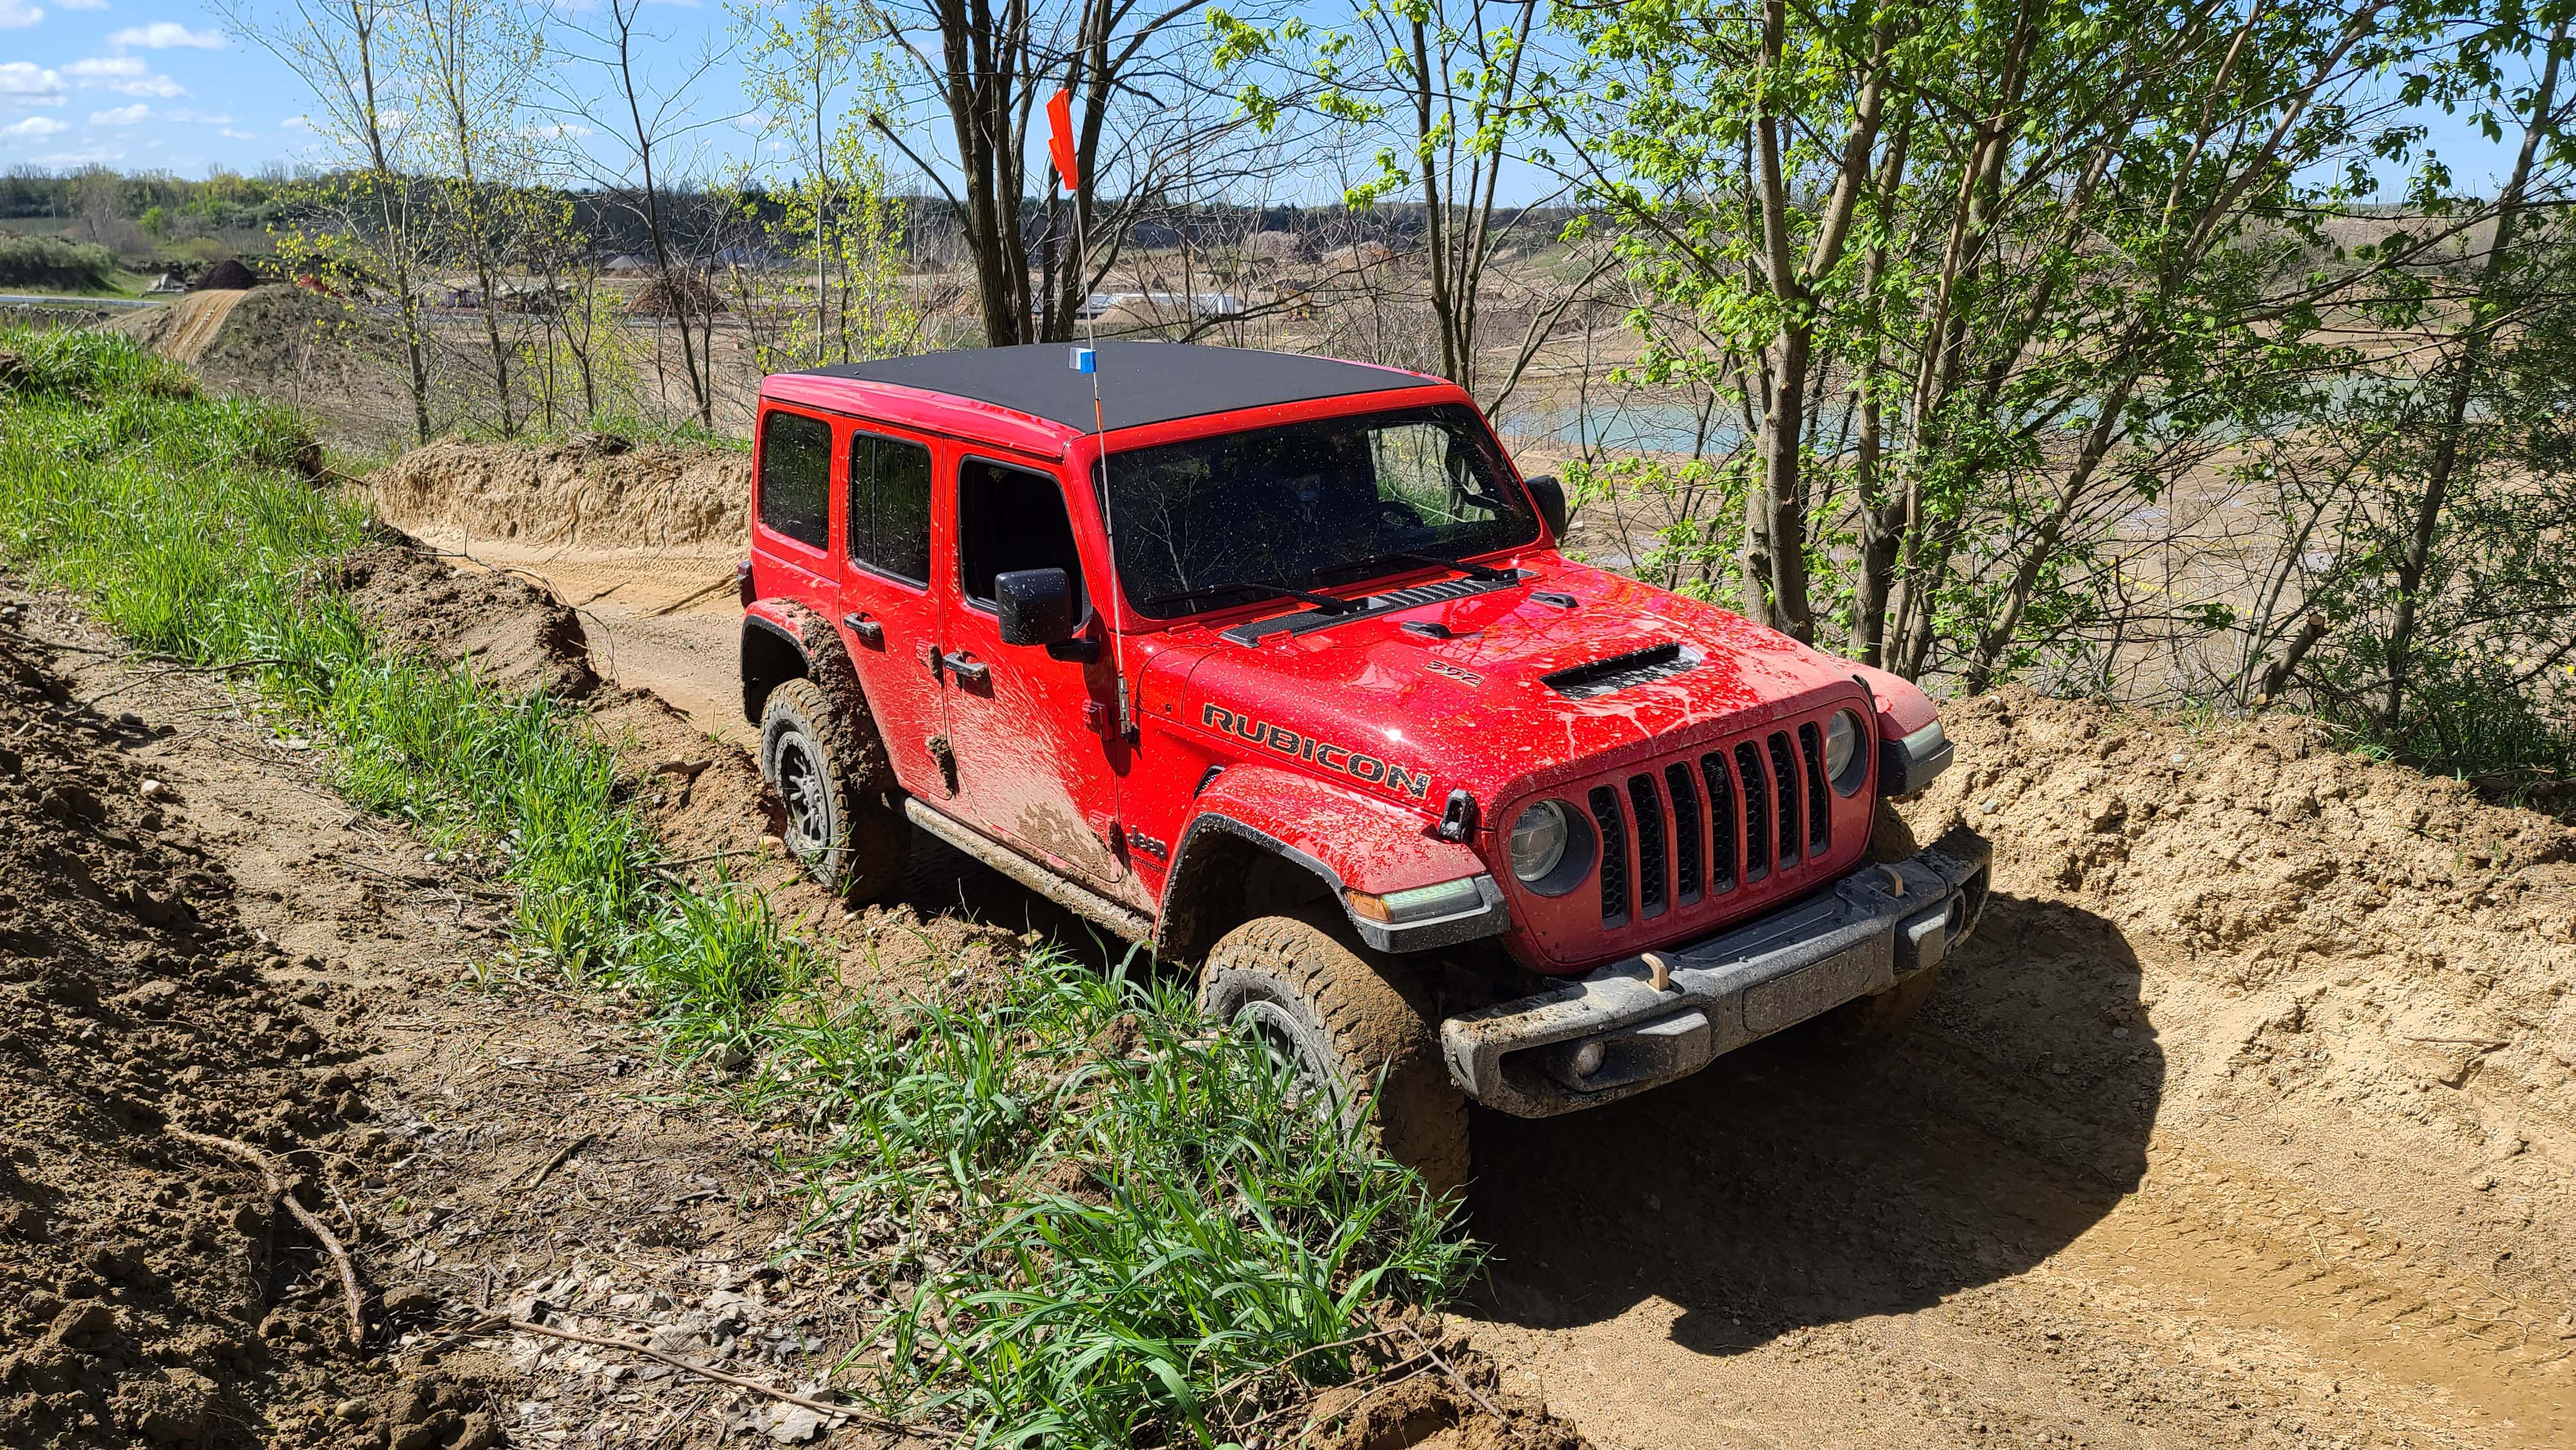 Payne: With V-8 power, Wrangler Rubicon 392 is King of the Jeeps